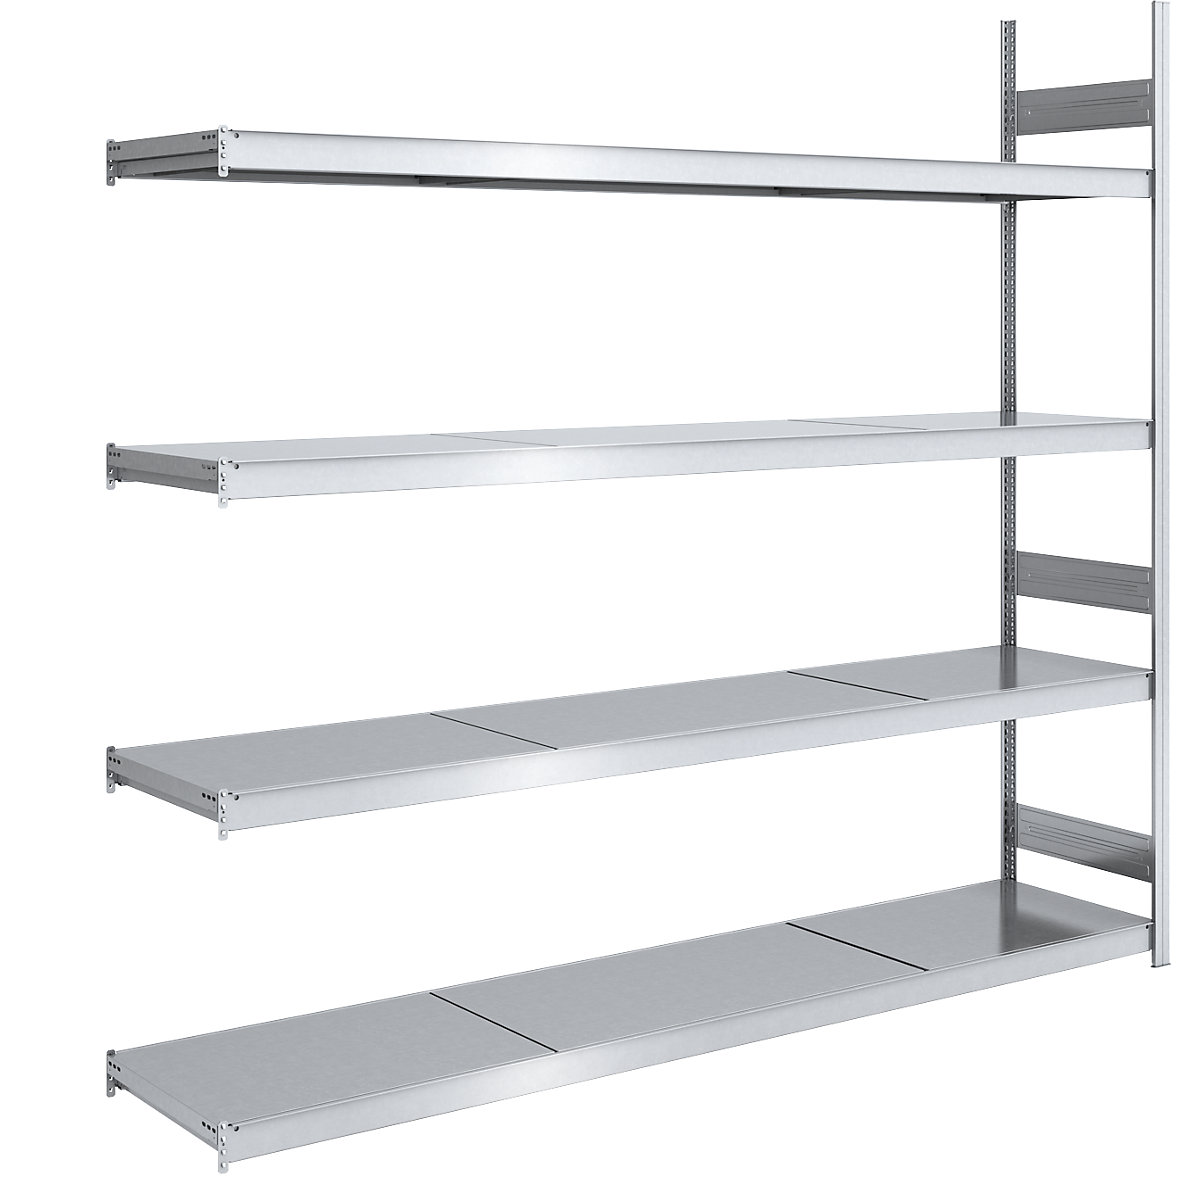 Hofe Wide Span Boltless Shelving Unit, Shelving Unit 22 Inches Wide